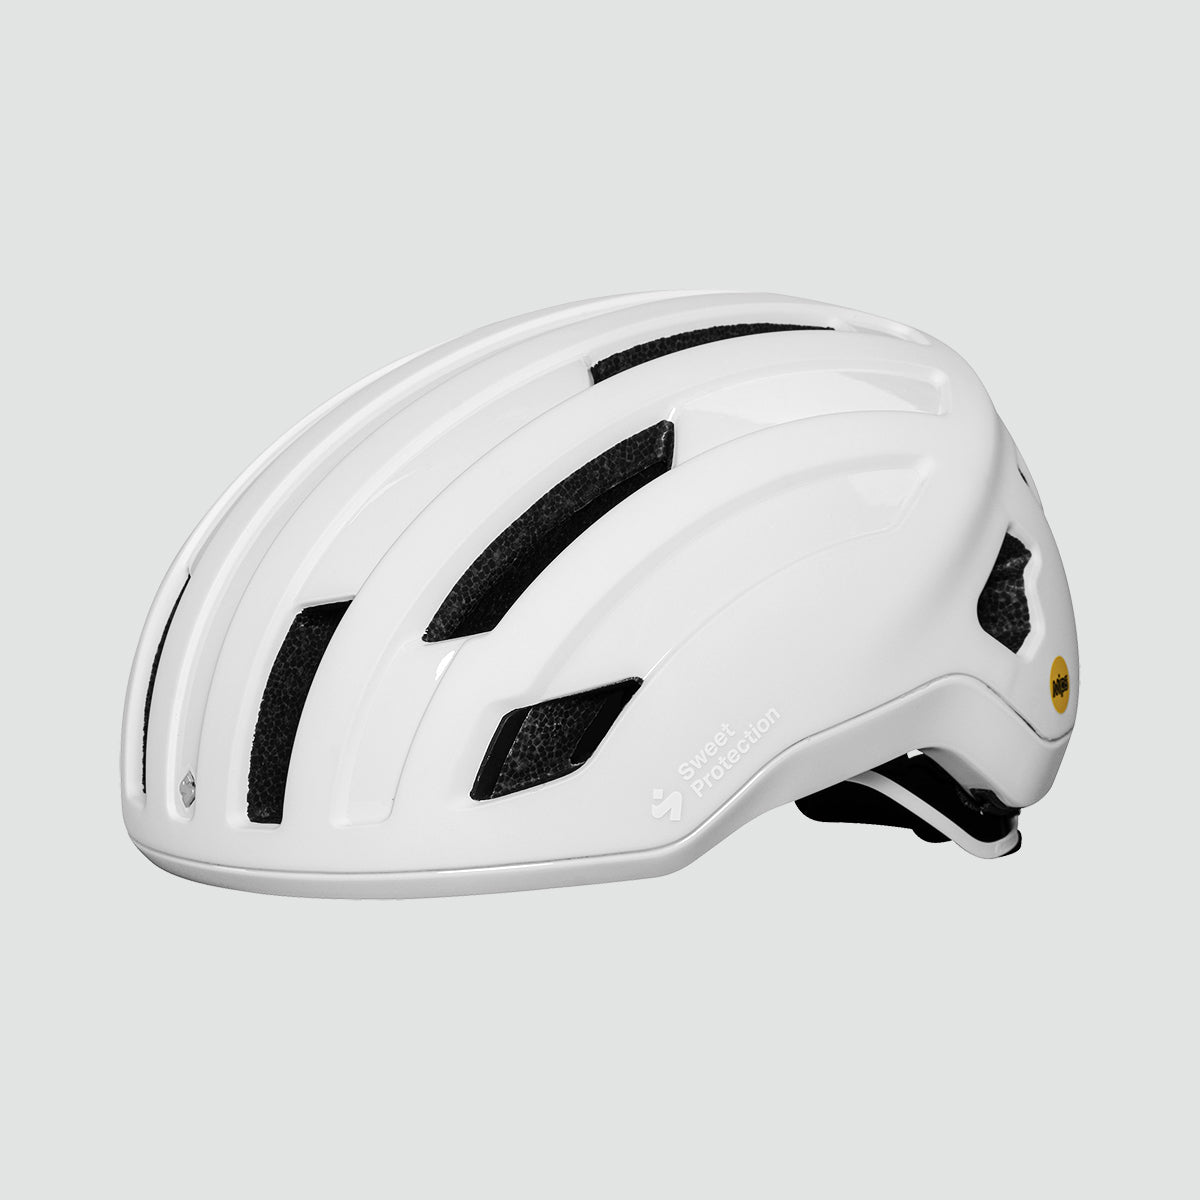 Casque Ourtrider MIPS - Blanc mat